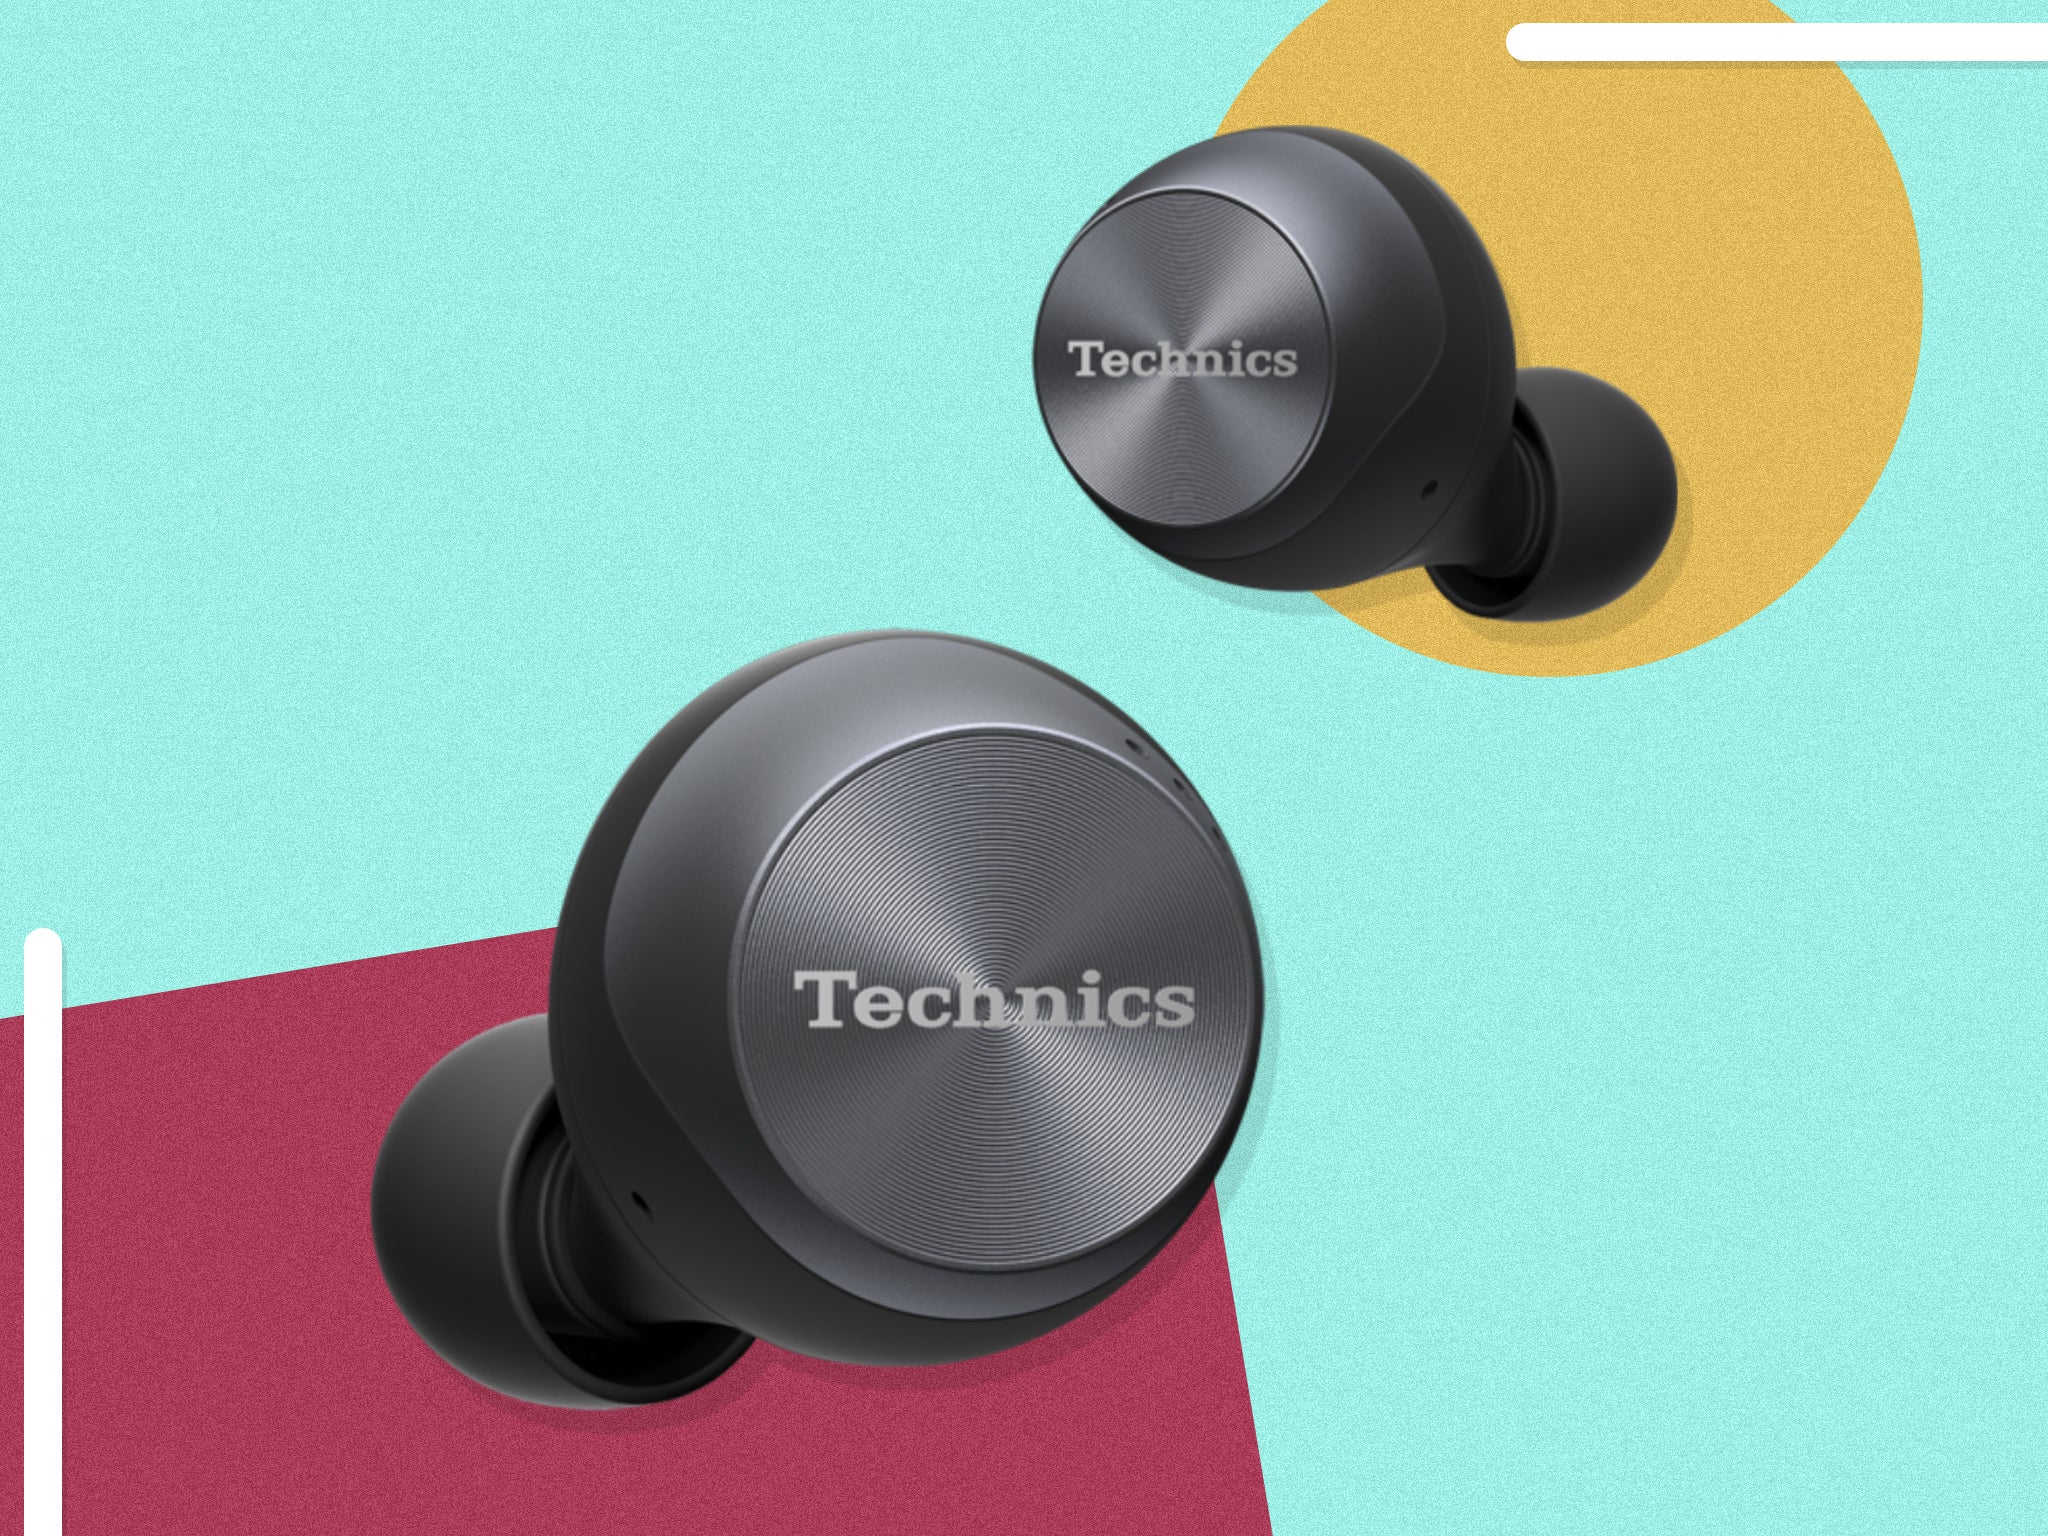 The sleek earbuds offer impressive sound quality, with bass that wouldn’t sound out of place in the over-ear market